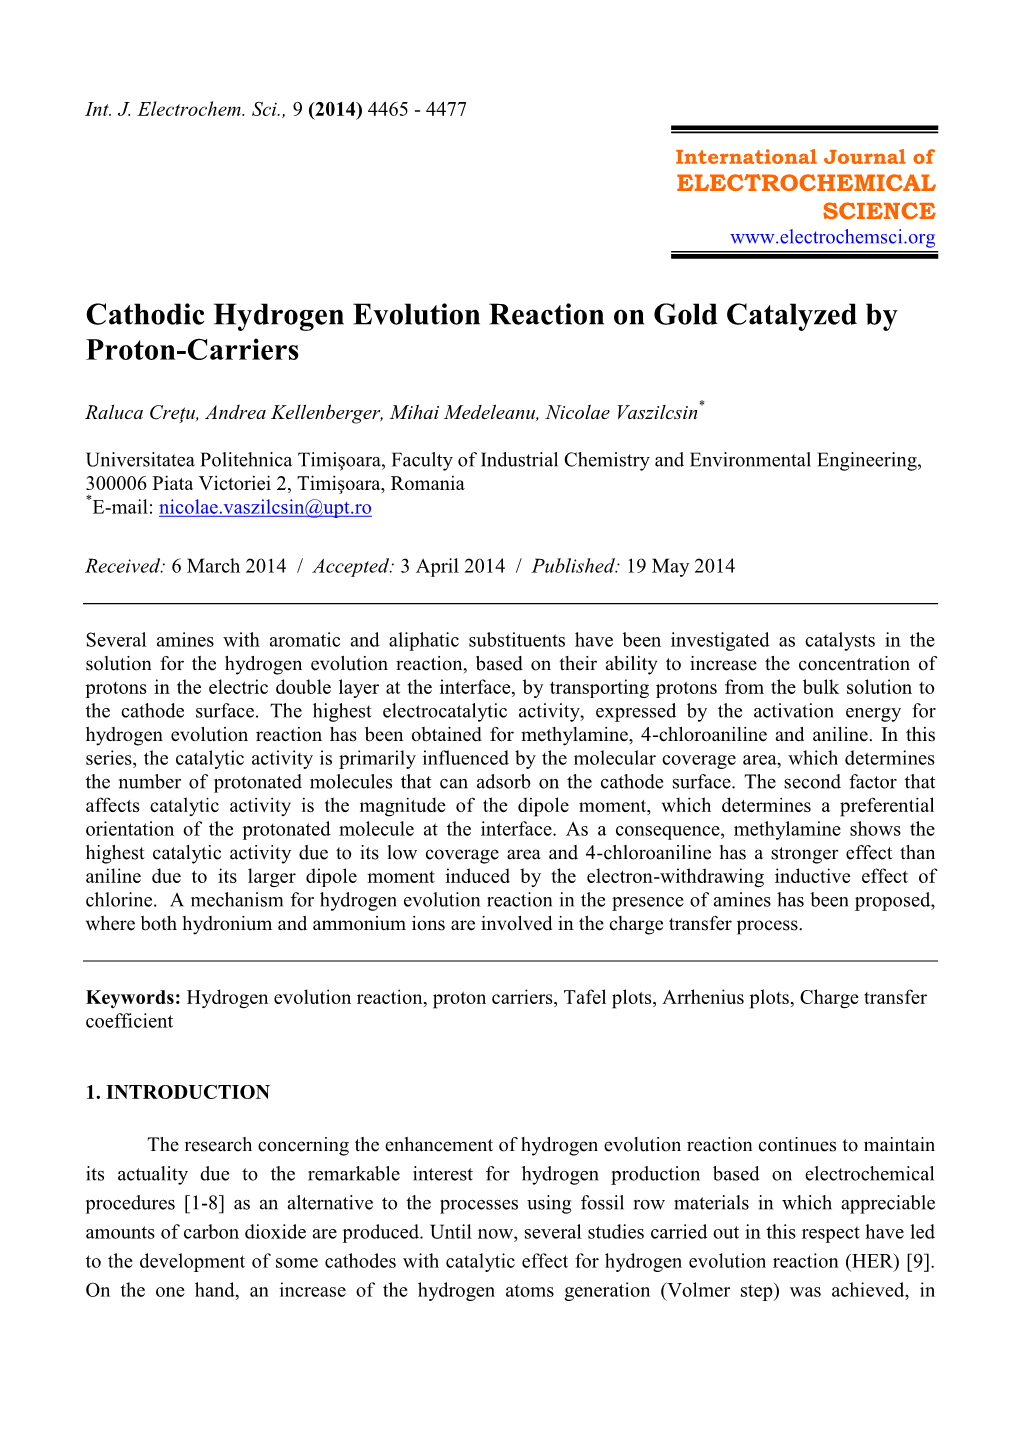 Cathodic Hydrogen Evolution Reaction on Gold Catalyzed by Proton-Carriers